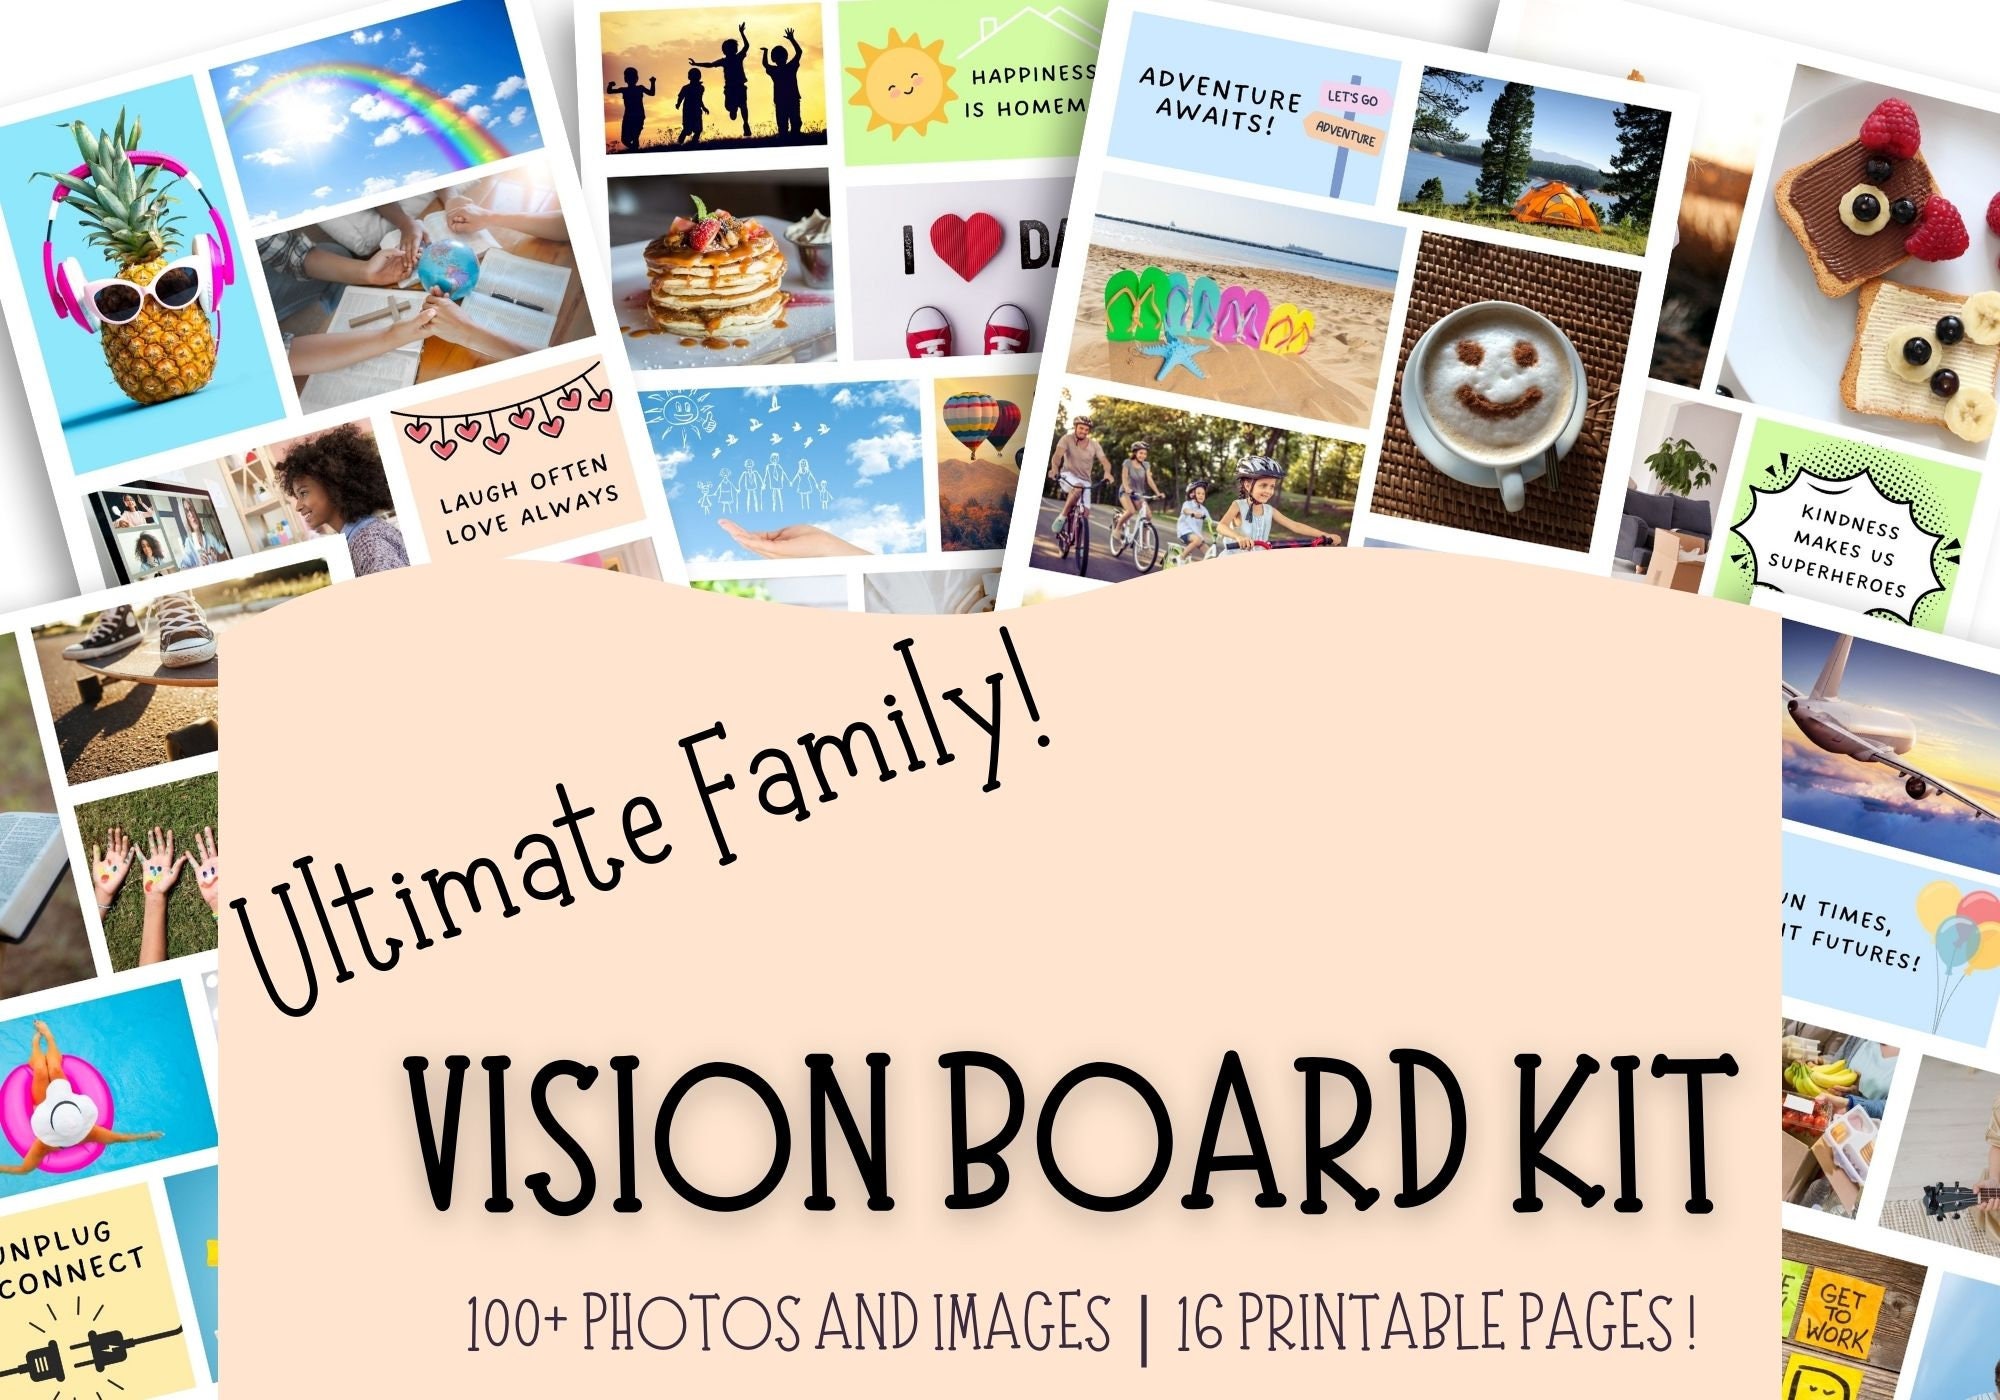 Vision Board Clip Art Book For Black Women: Create Powerful Vision Boards  from 200+ Pictures, Quotes and Words Vision Board Supplies for Black Women